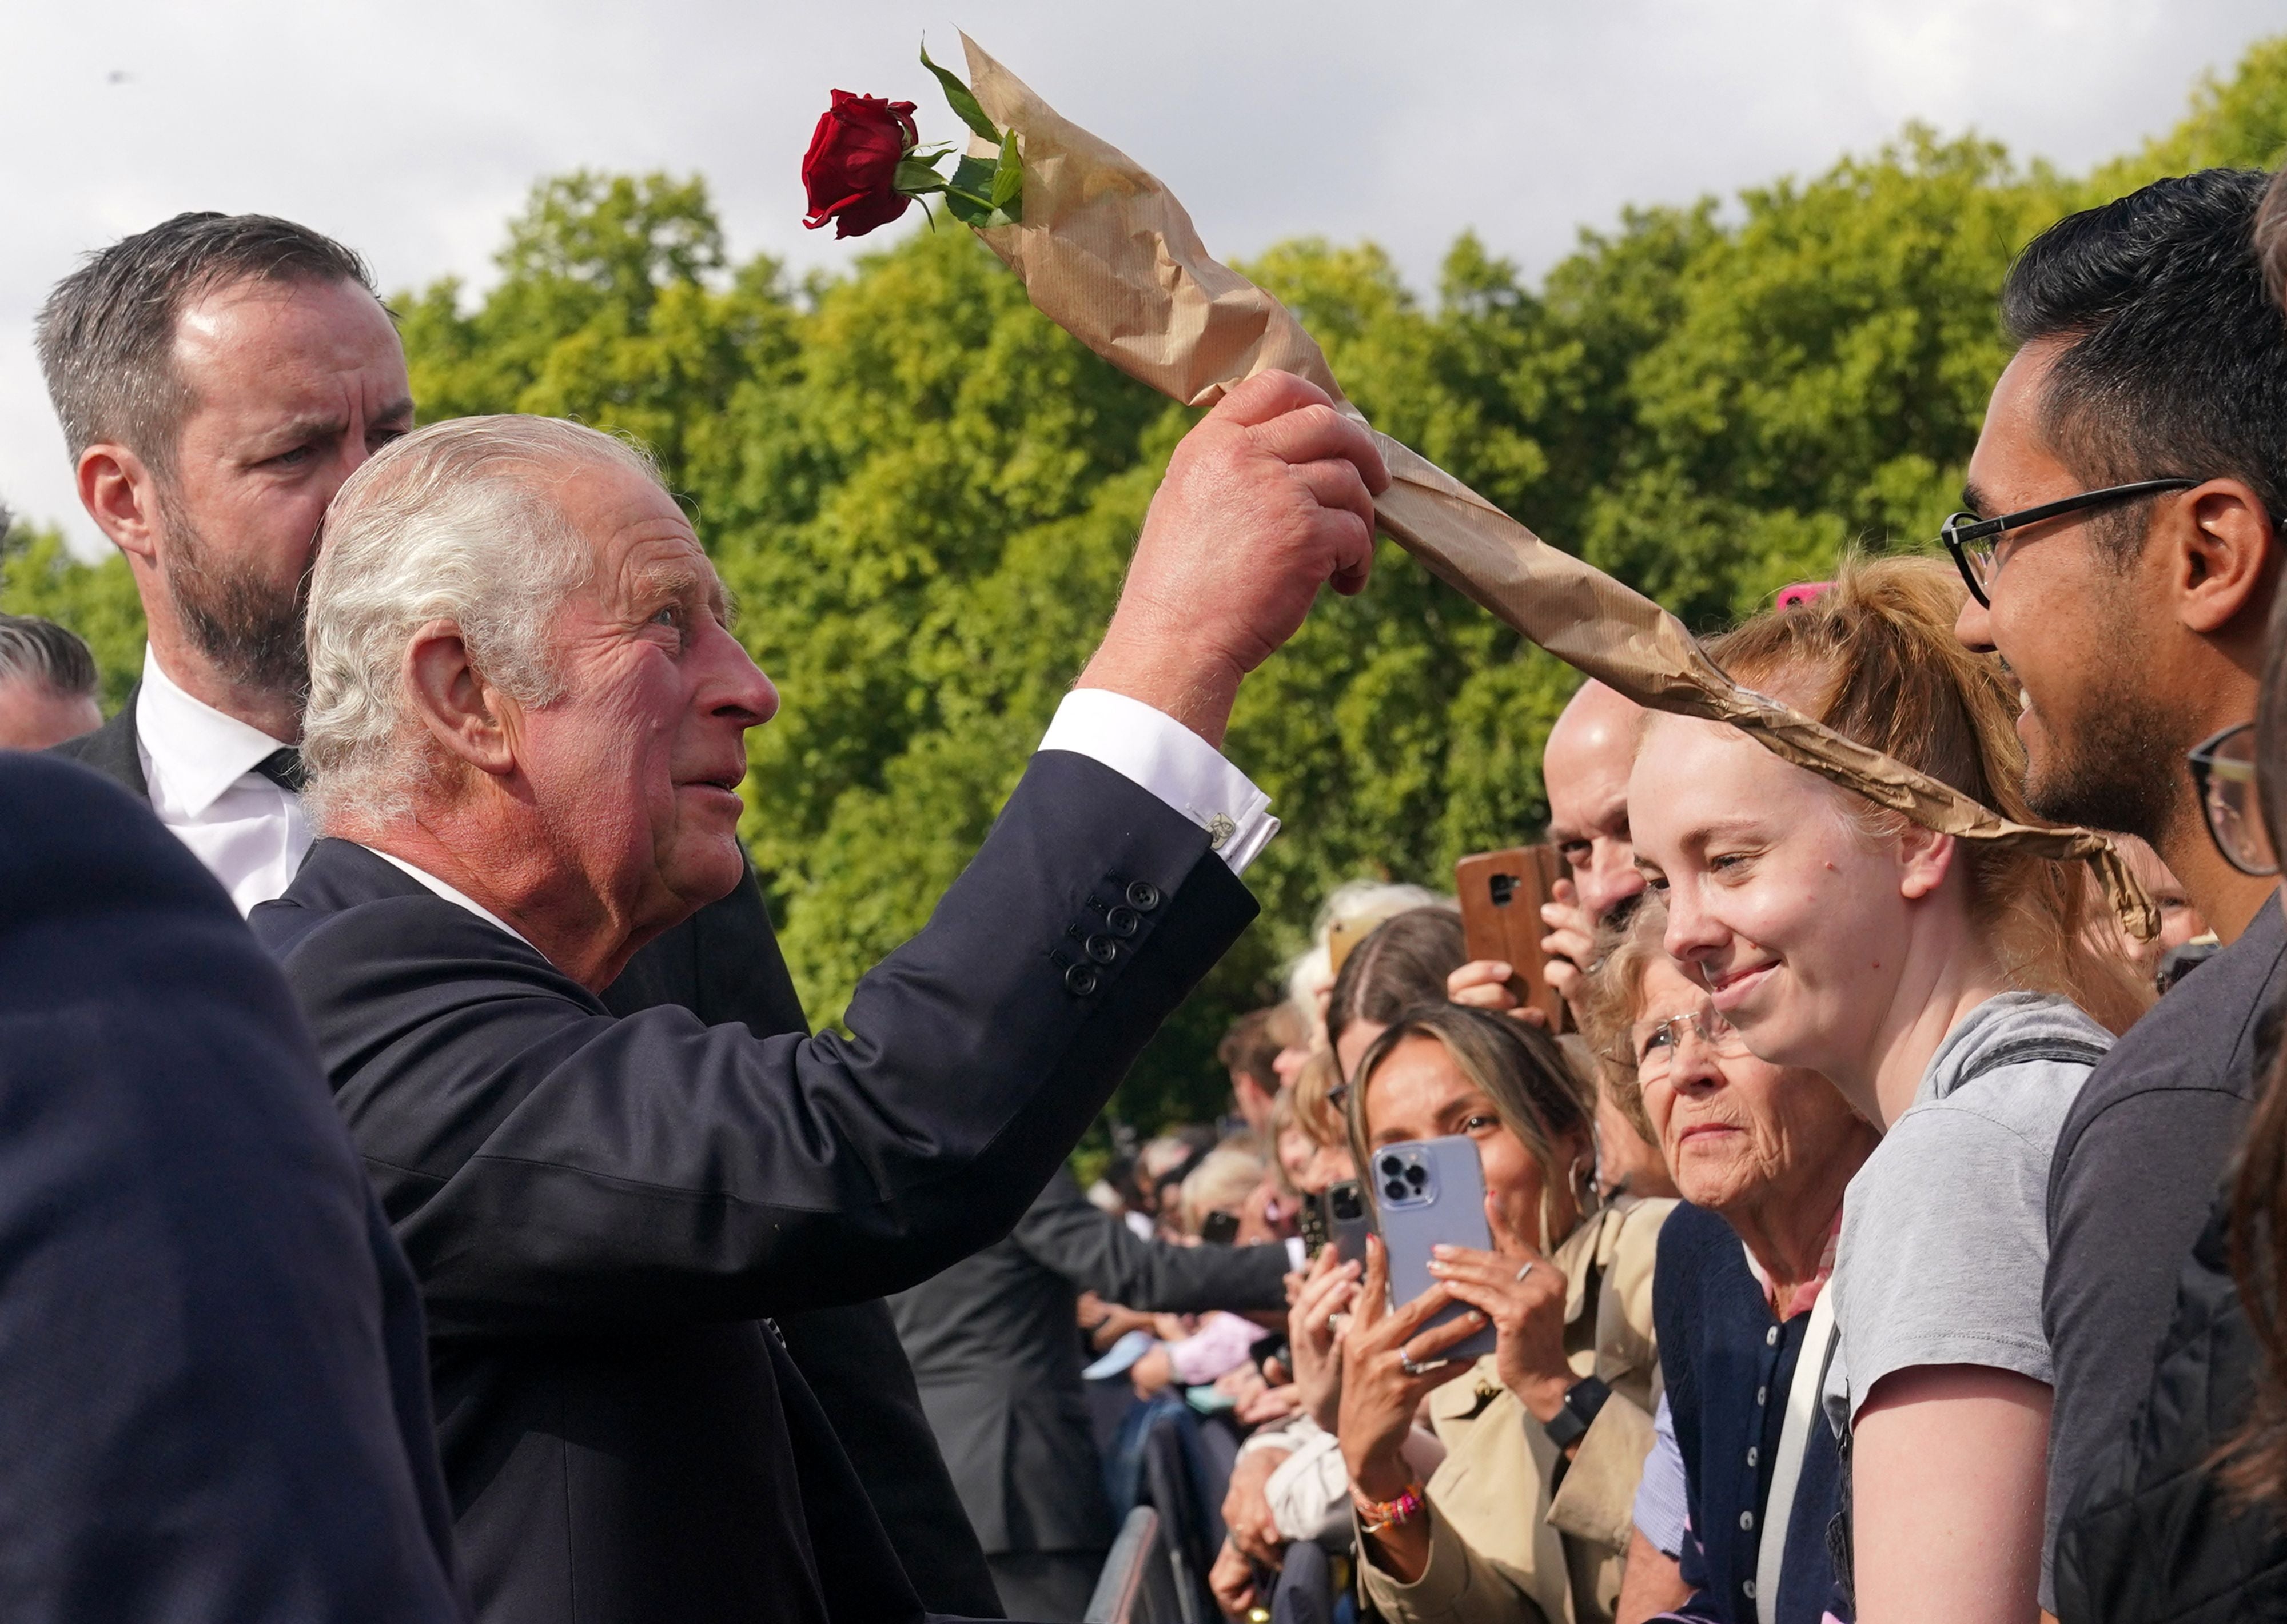 King Charles III accepts a single rose from a member of the public